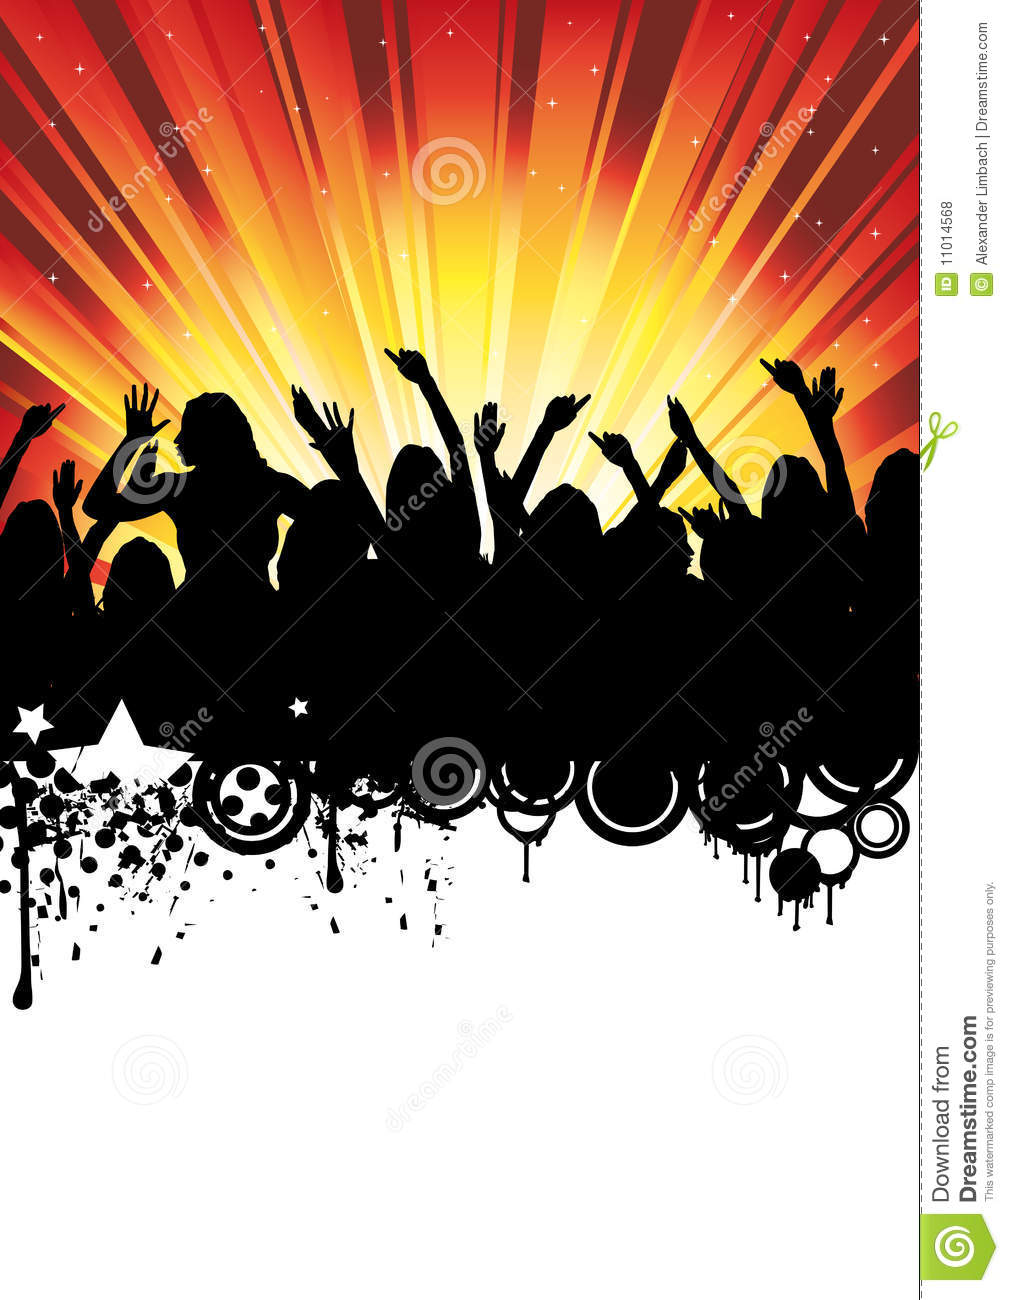 Disco Music Party Flyer Dancing People Royalty Free Stock Photos